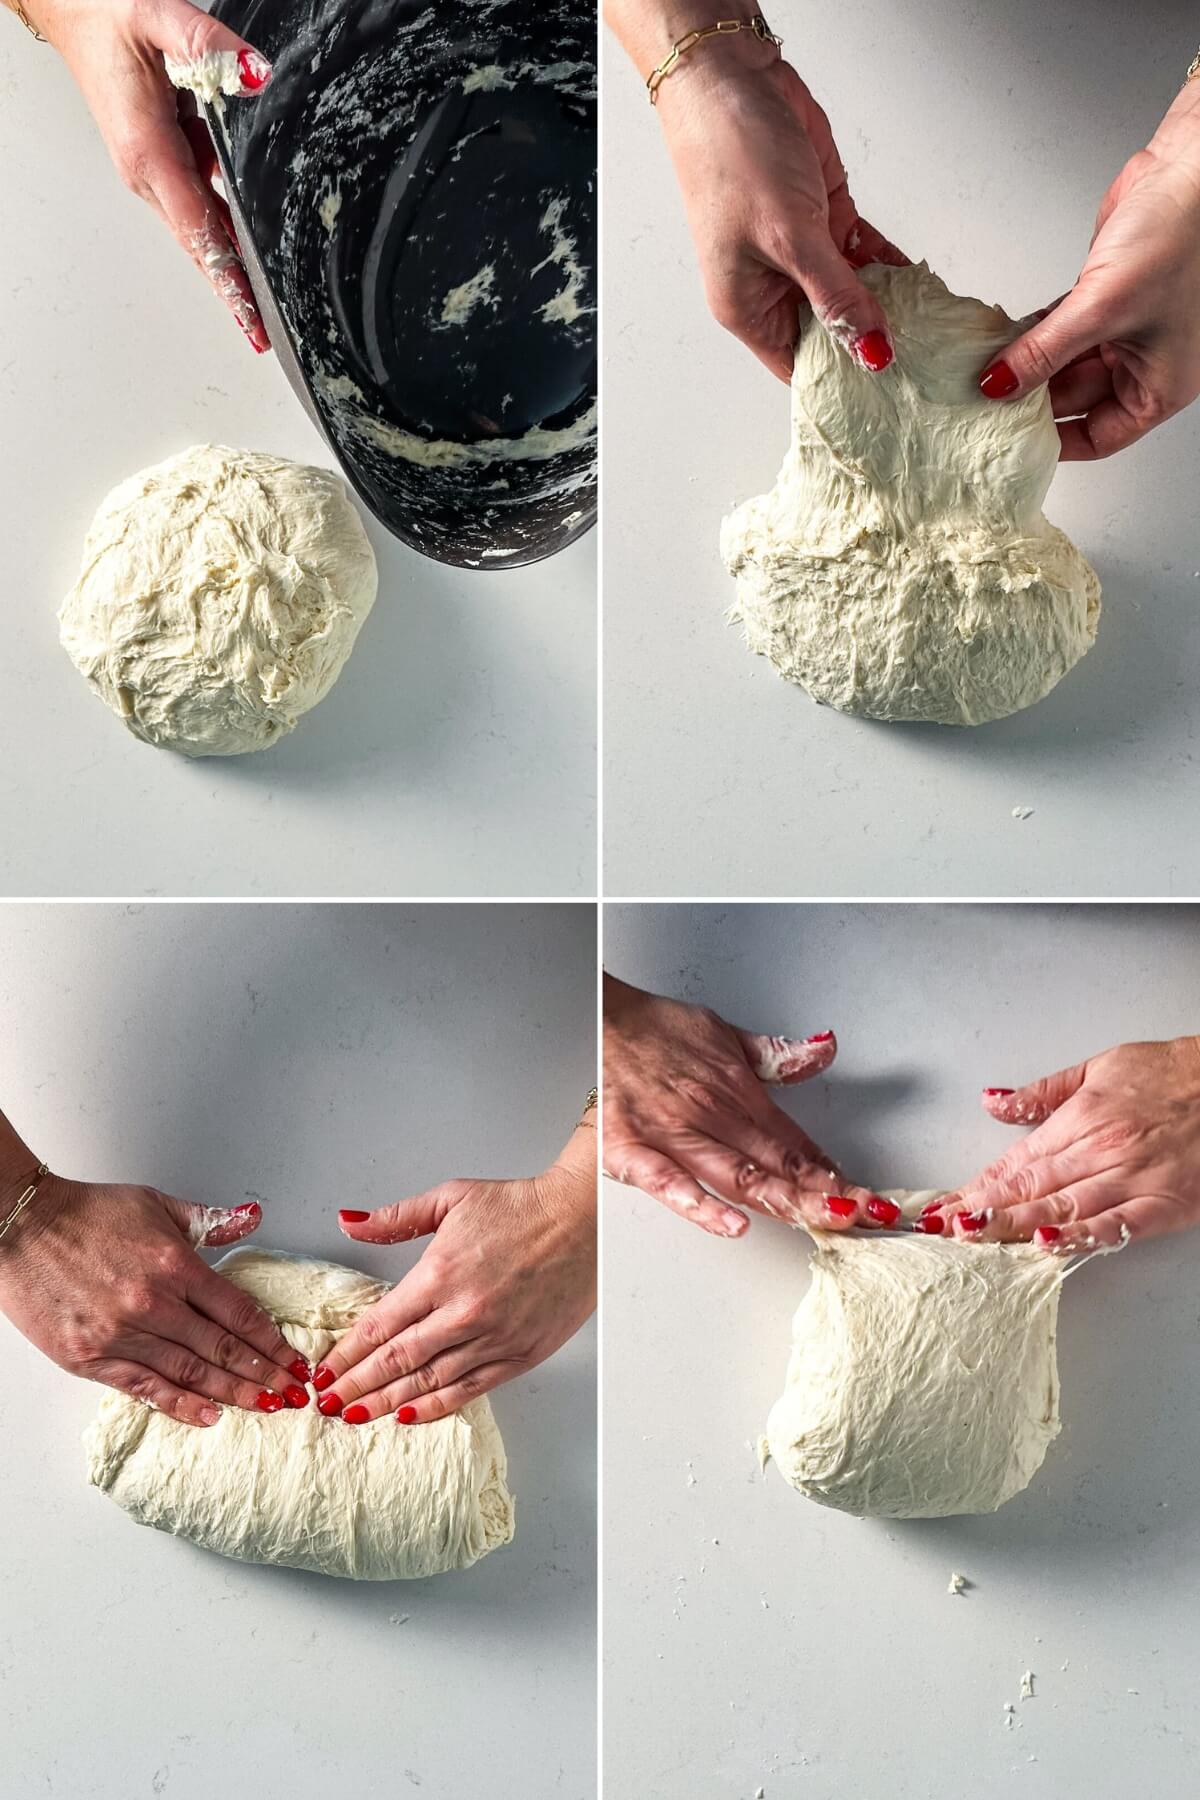 Developing structure of dough by kneading and stretching.